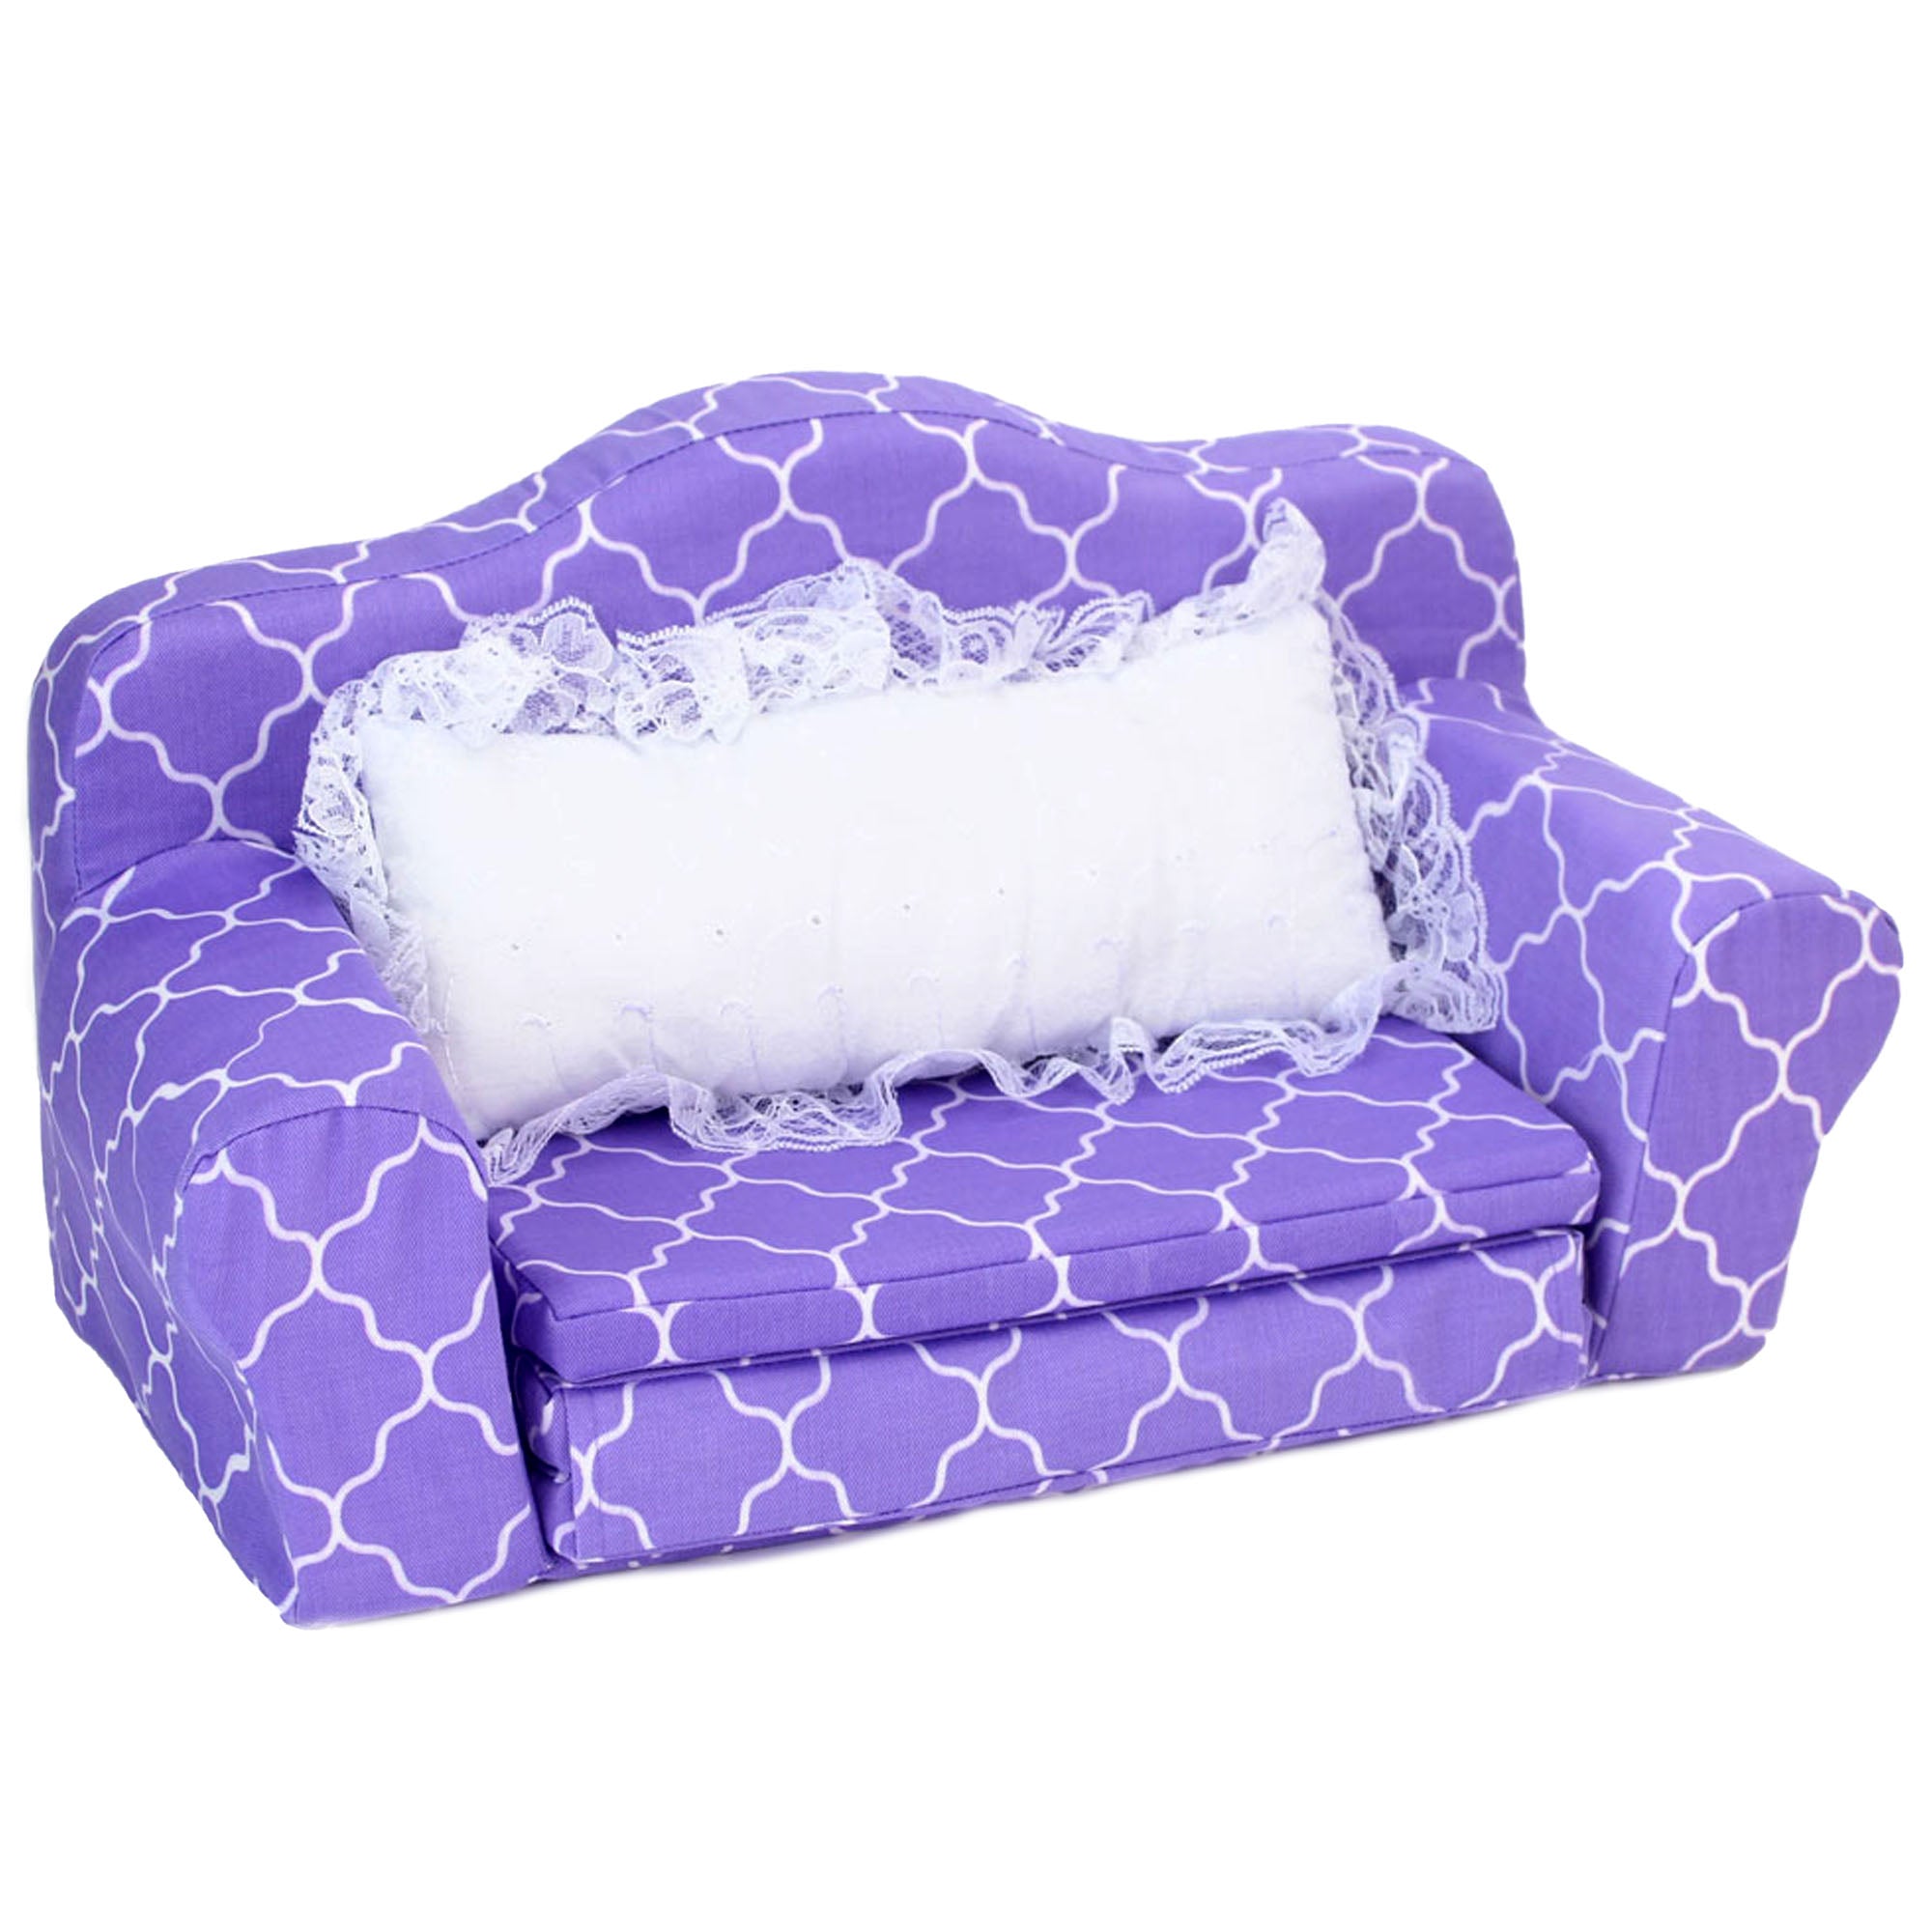 Sophia’s Plush Pull Out Couch/Double Bed Sized for 18" Dolls, Purple